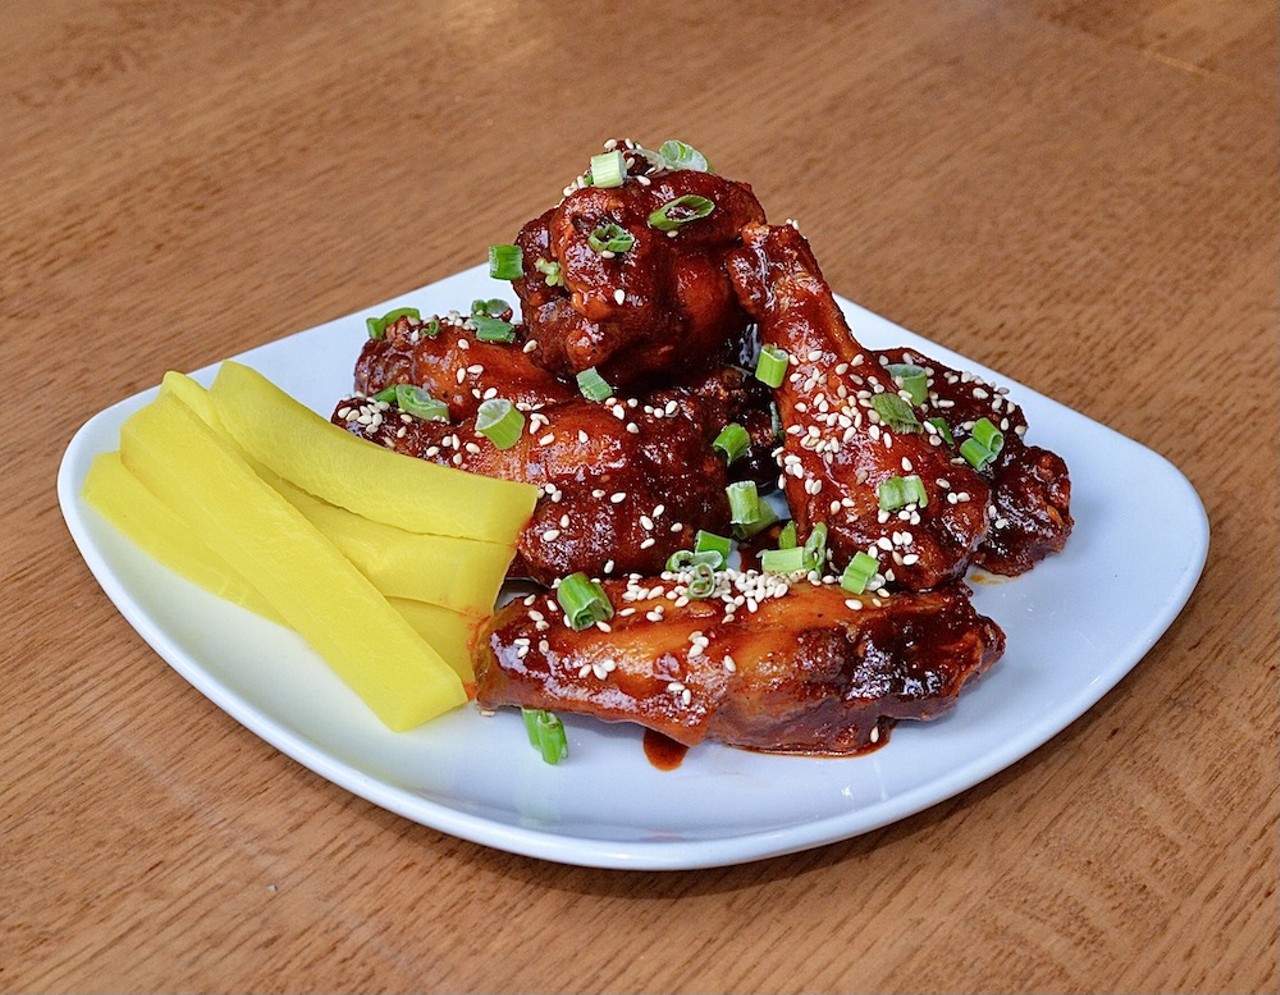  Ninja City Kitchen and Bar 
6706 Detroit Ave., Cleveland
Ninja City is offering their gochujang wings - crispy fried chicken wings tossed in spicy Korean chili sauce. They’re garnished with sesame seeds & scallions, served with pickled yellow daikon. Miller Lite special: add High Life pint for $3 or Yuzu Spaghett for $4.